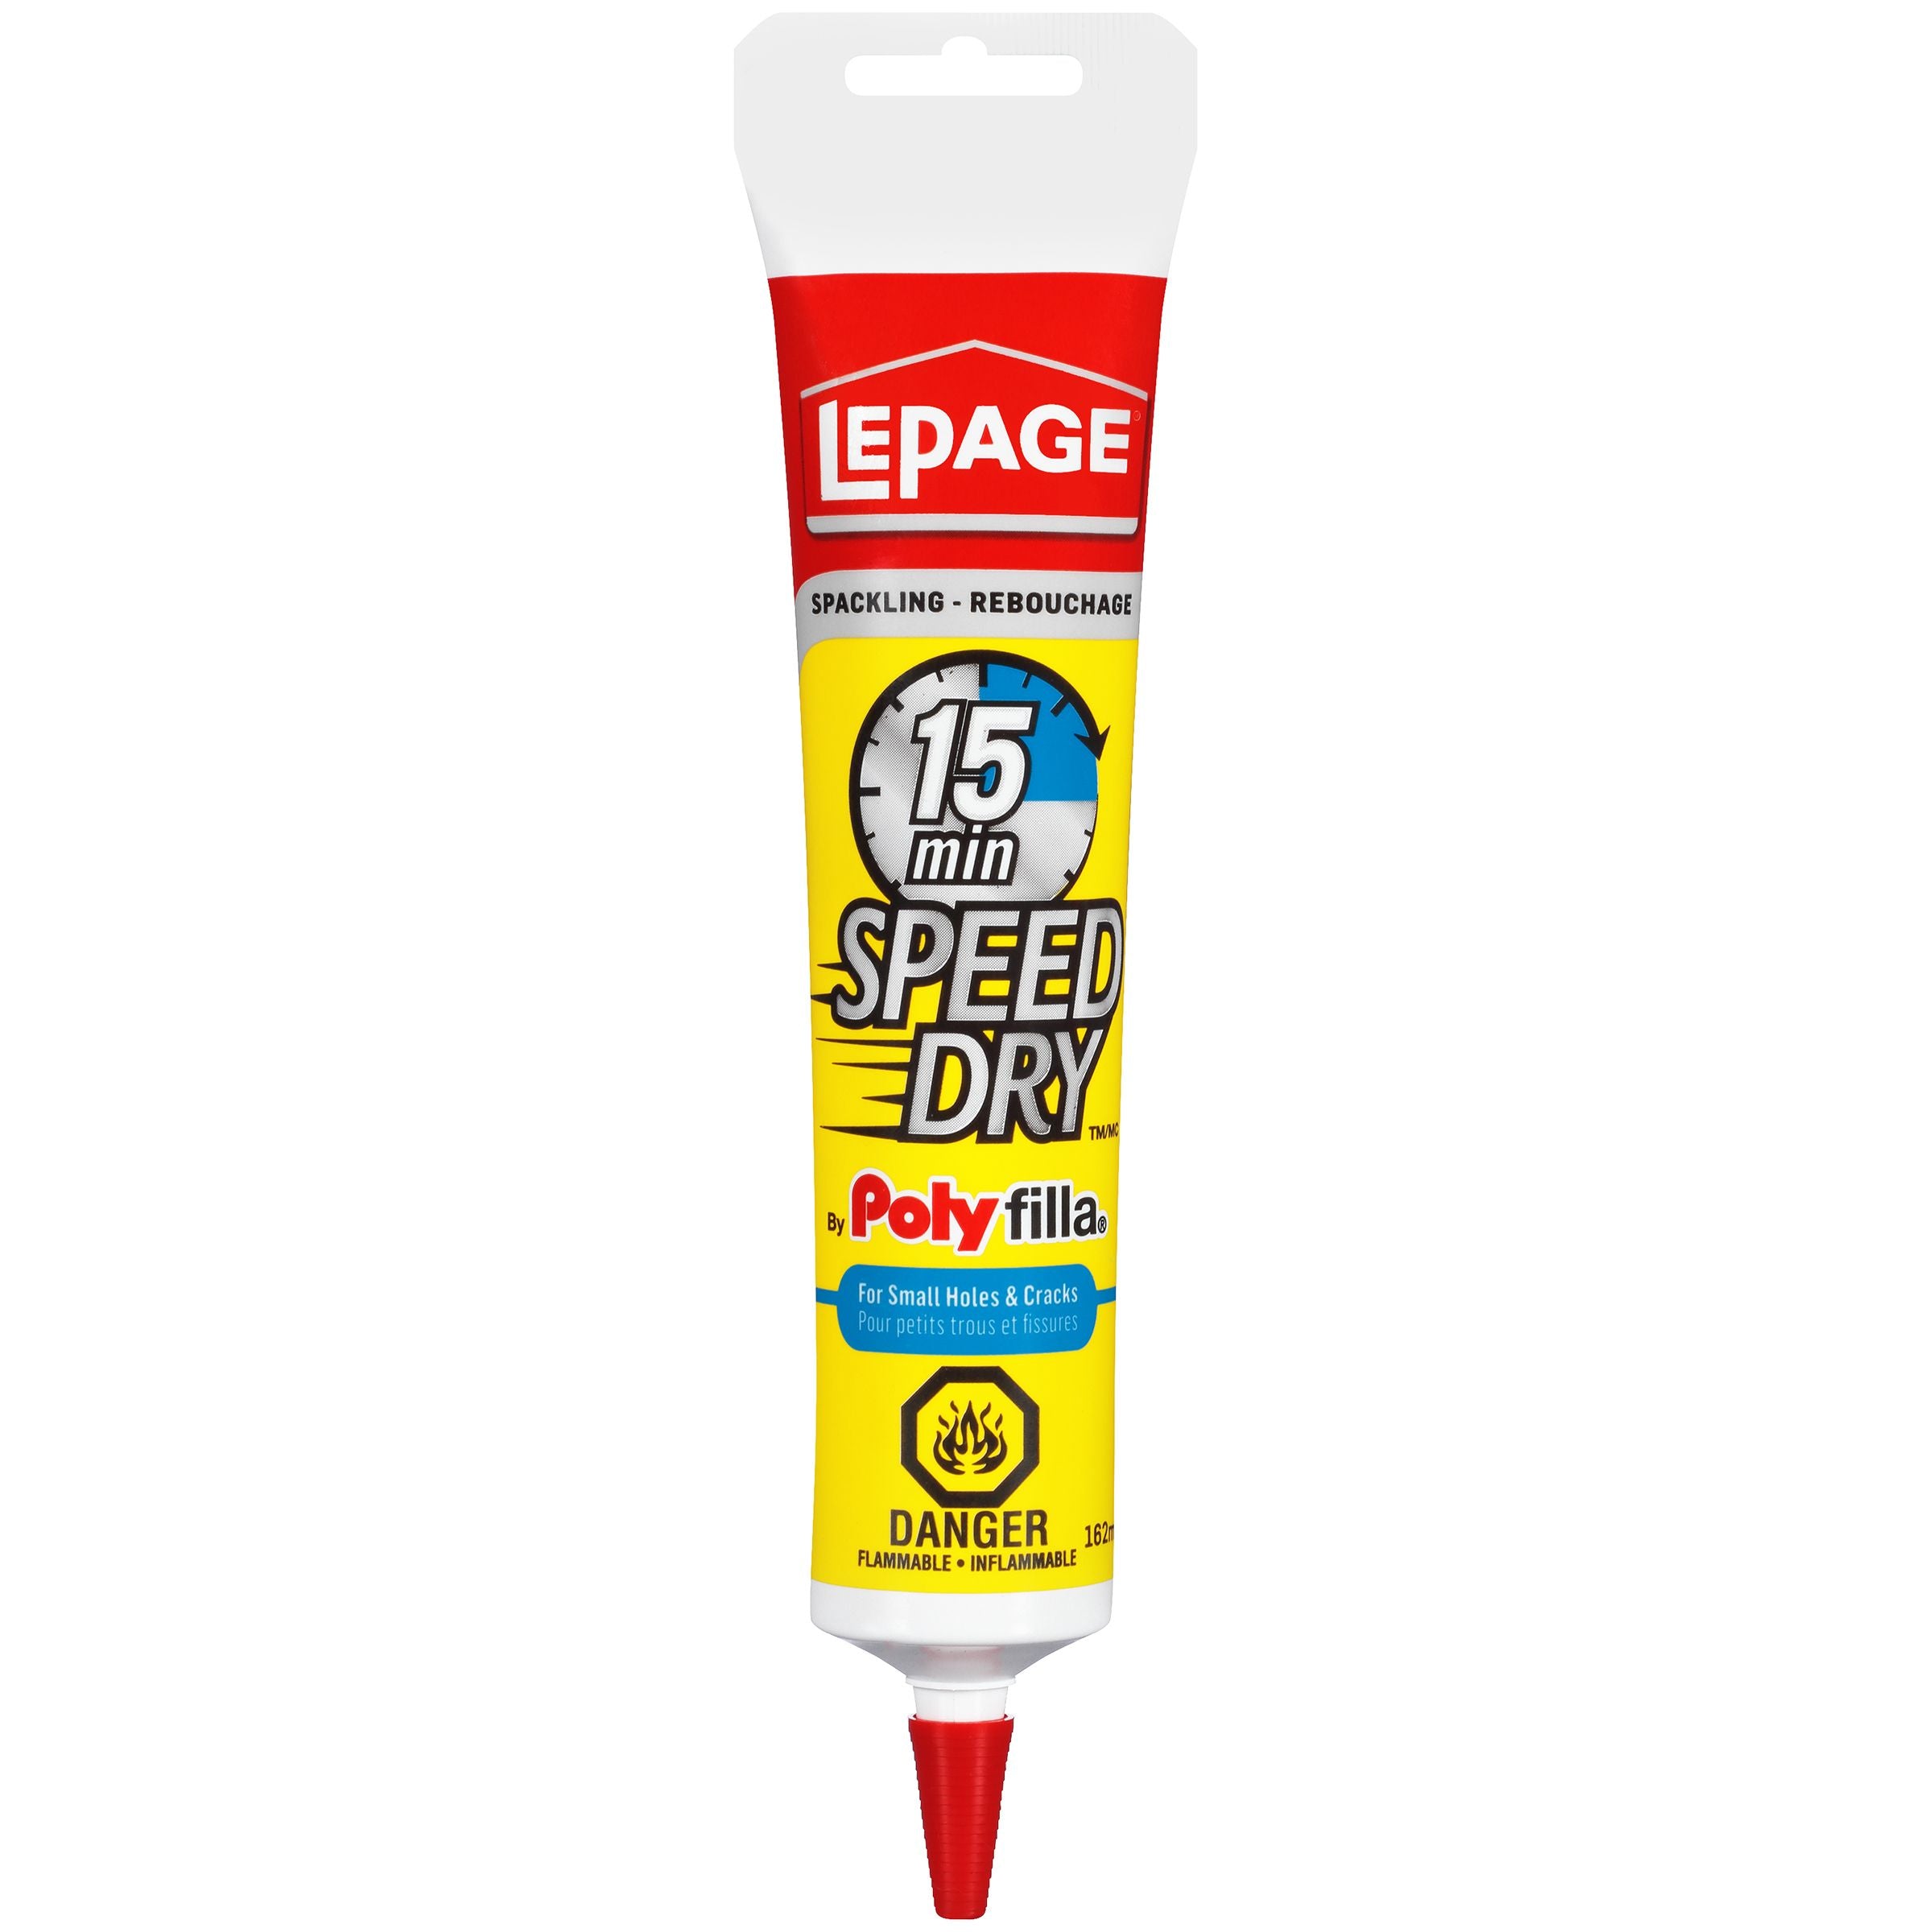 LePage Polyfilla Spackling 162ml, Off-white